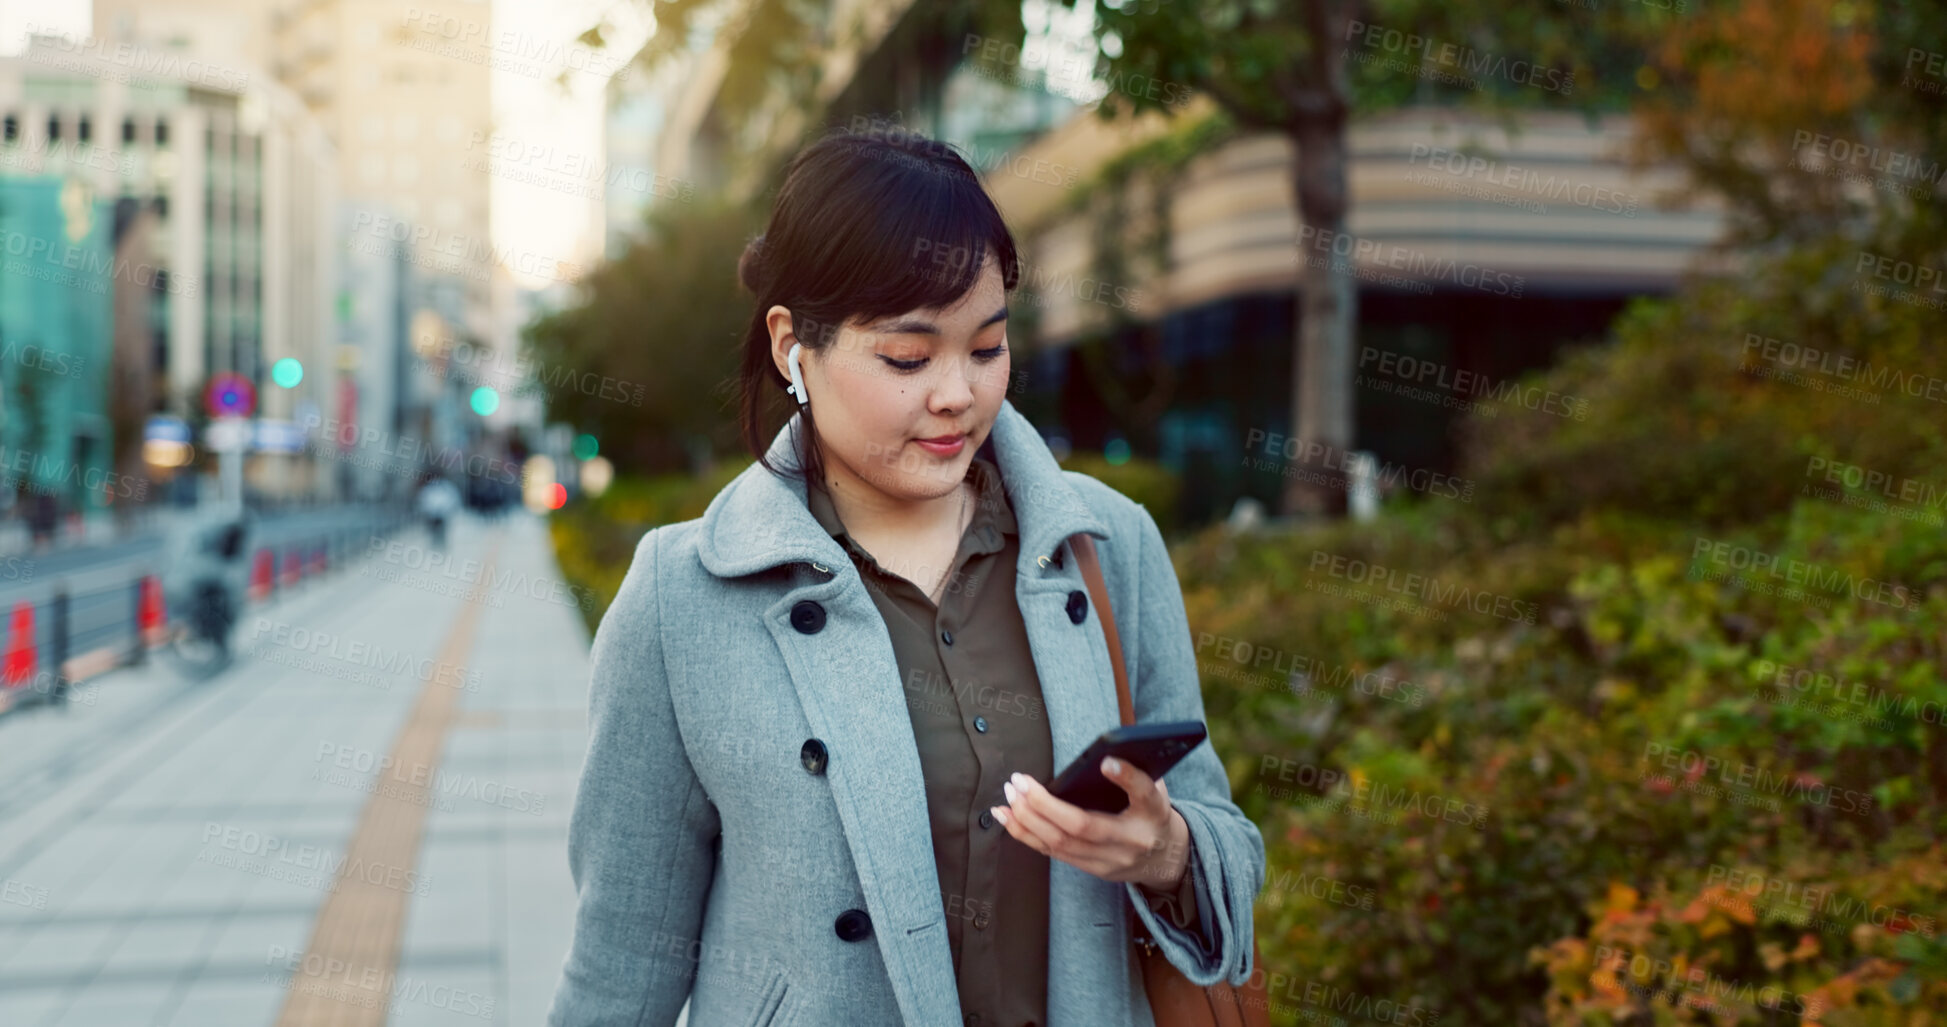 Buy stock photo Phone, walking and business woman in the city networking on social media, mobile app or internet. Technology, street and professional Asian female person with cellphone commuting in street in town.